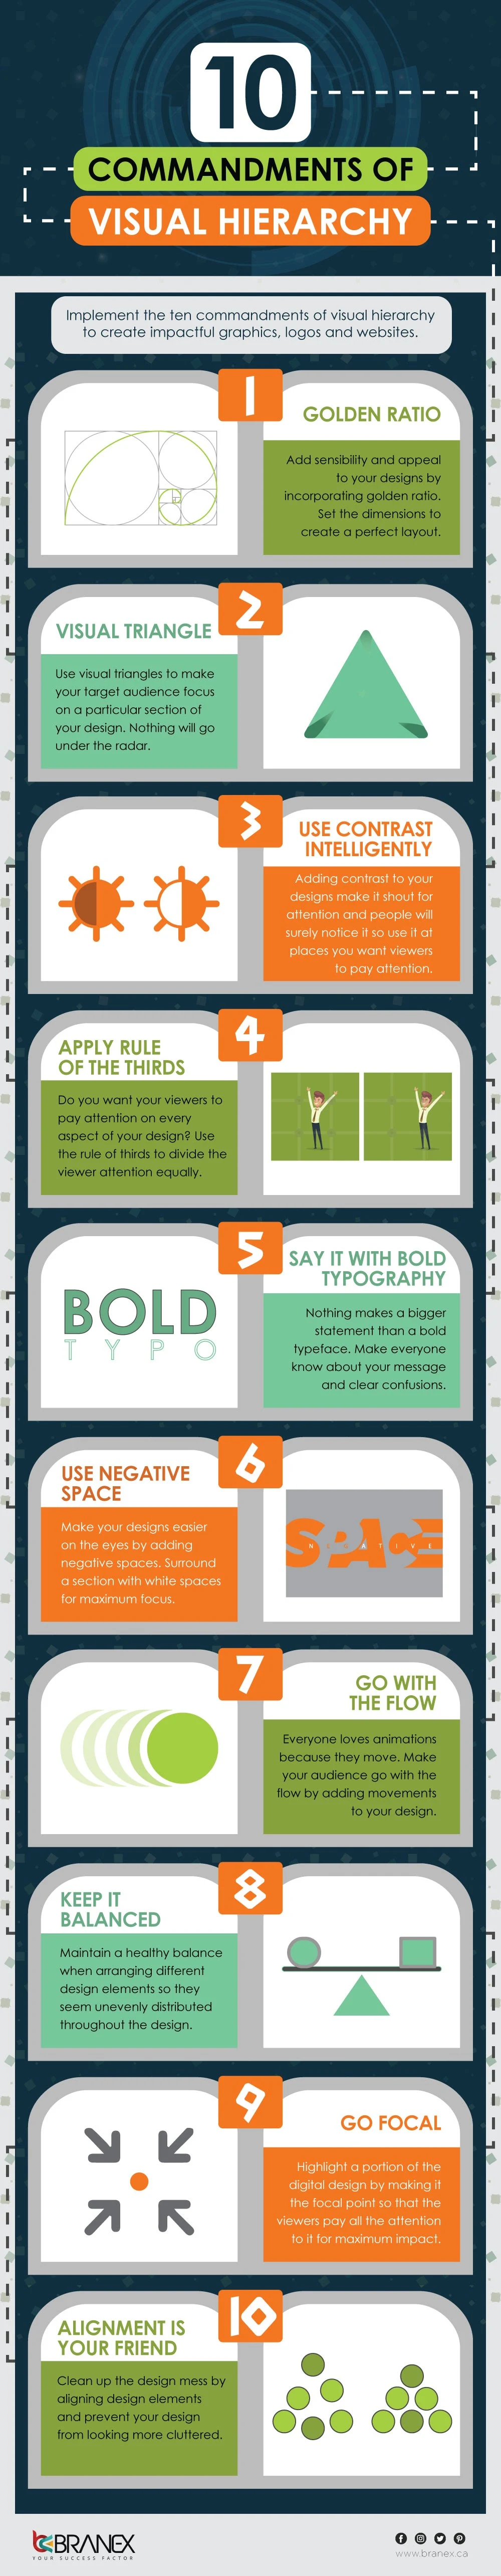 10 Commandments of Visual Hierarchy #Infographic